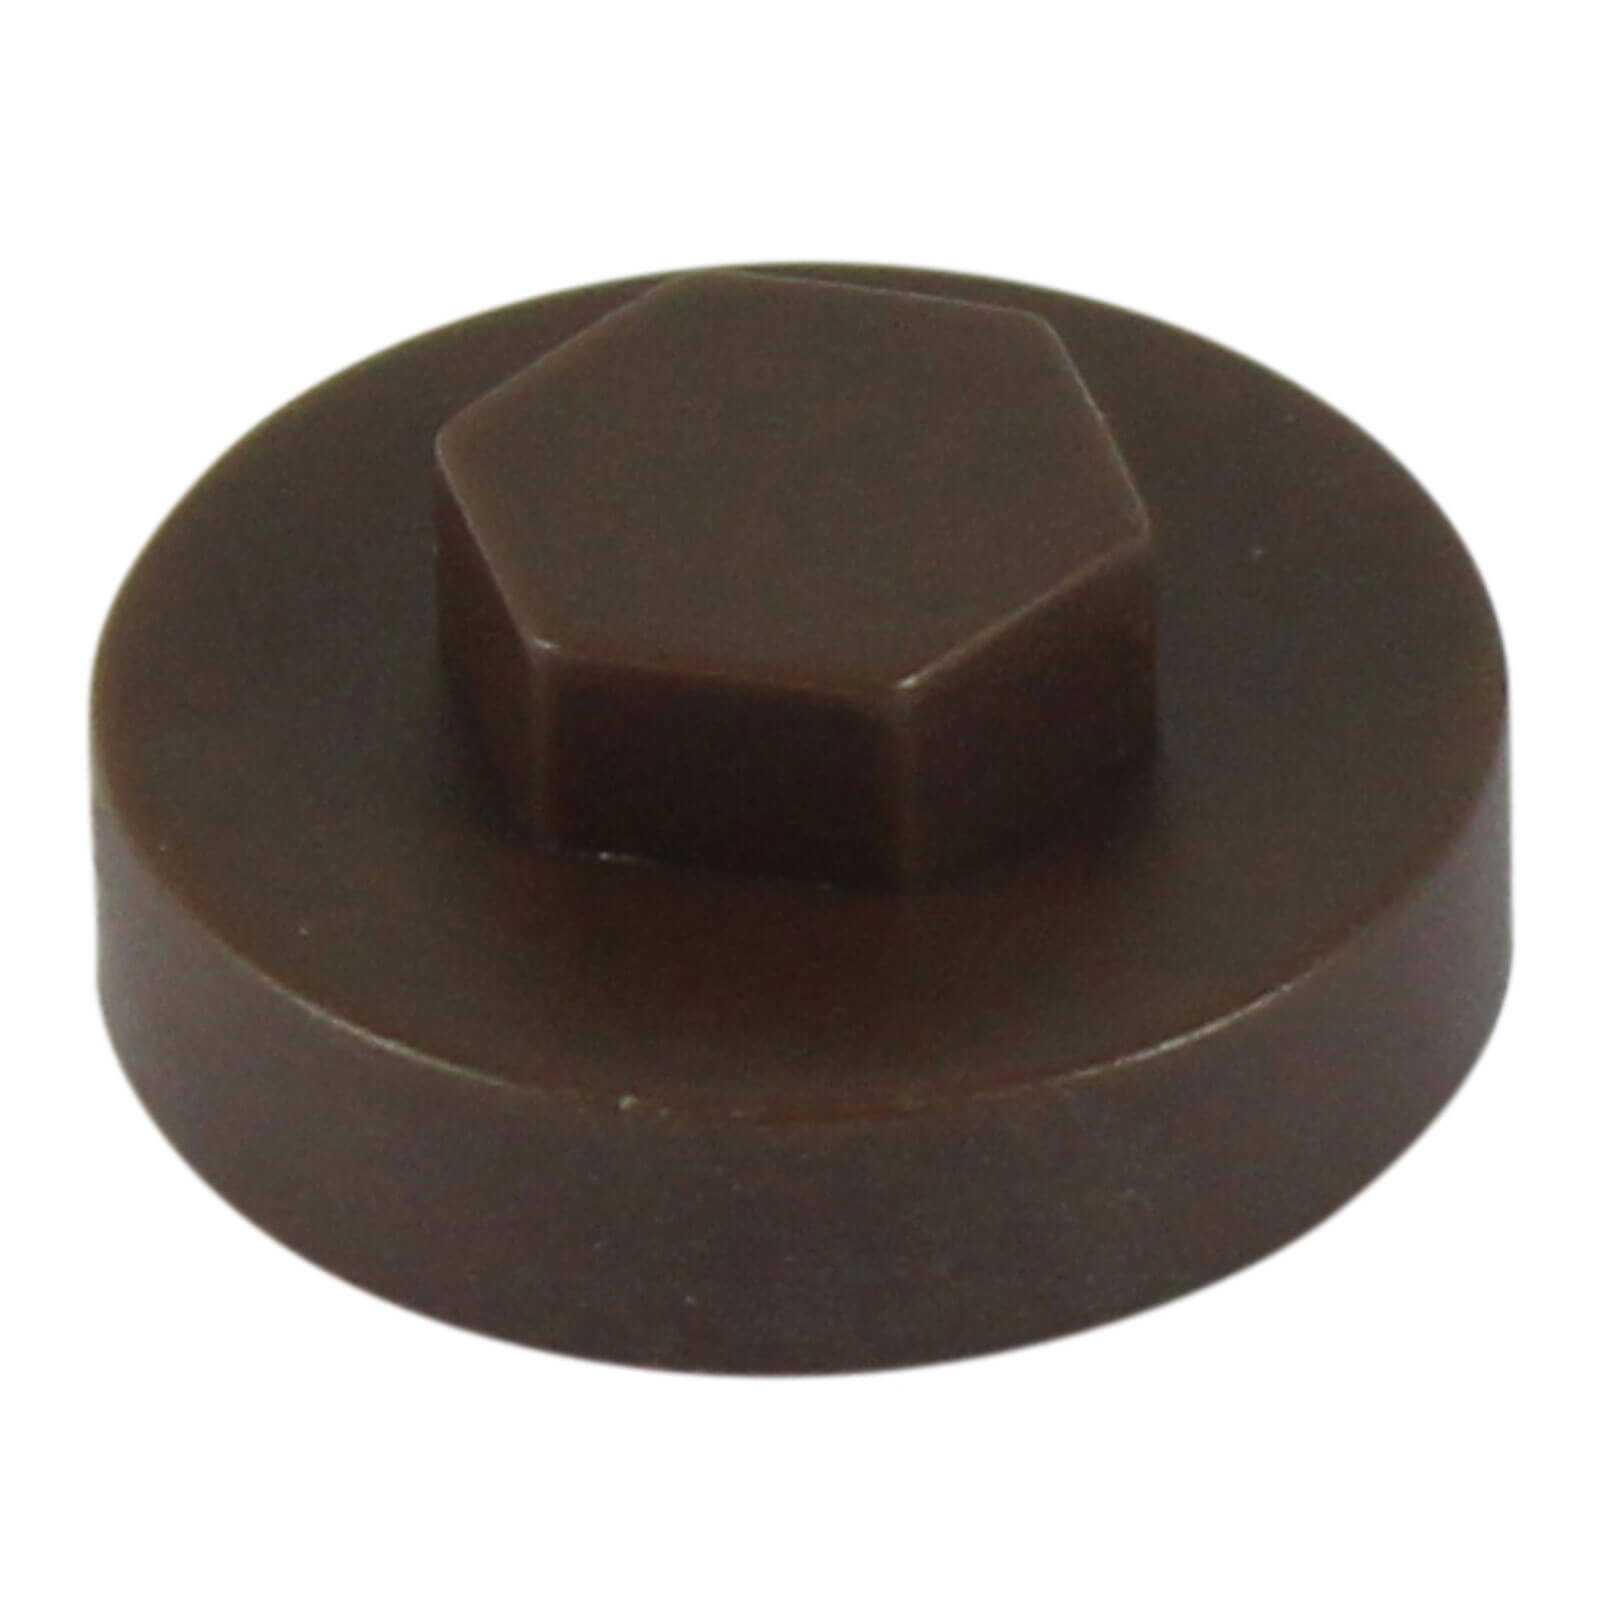 Image of Colour Match Hexagon Screw Cover Cap 5/16" x 19mm Van Dyke Brown Pack of 1000